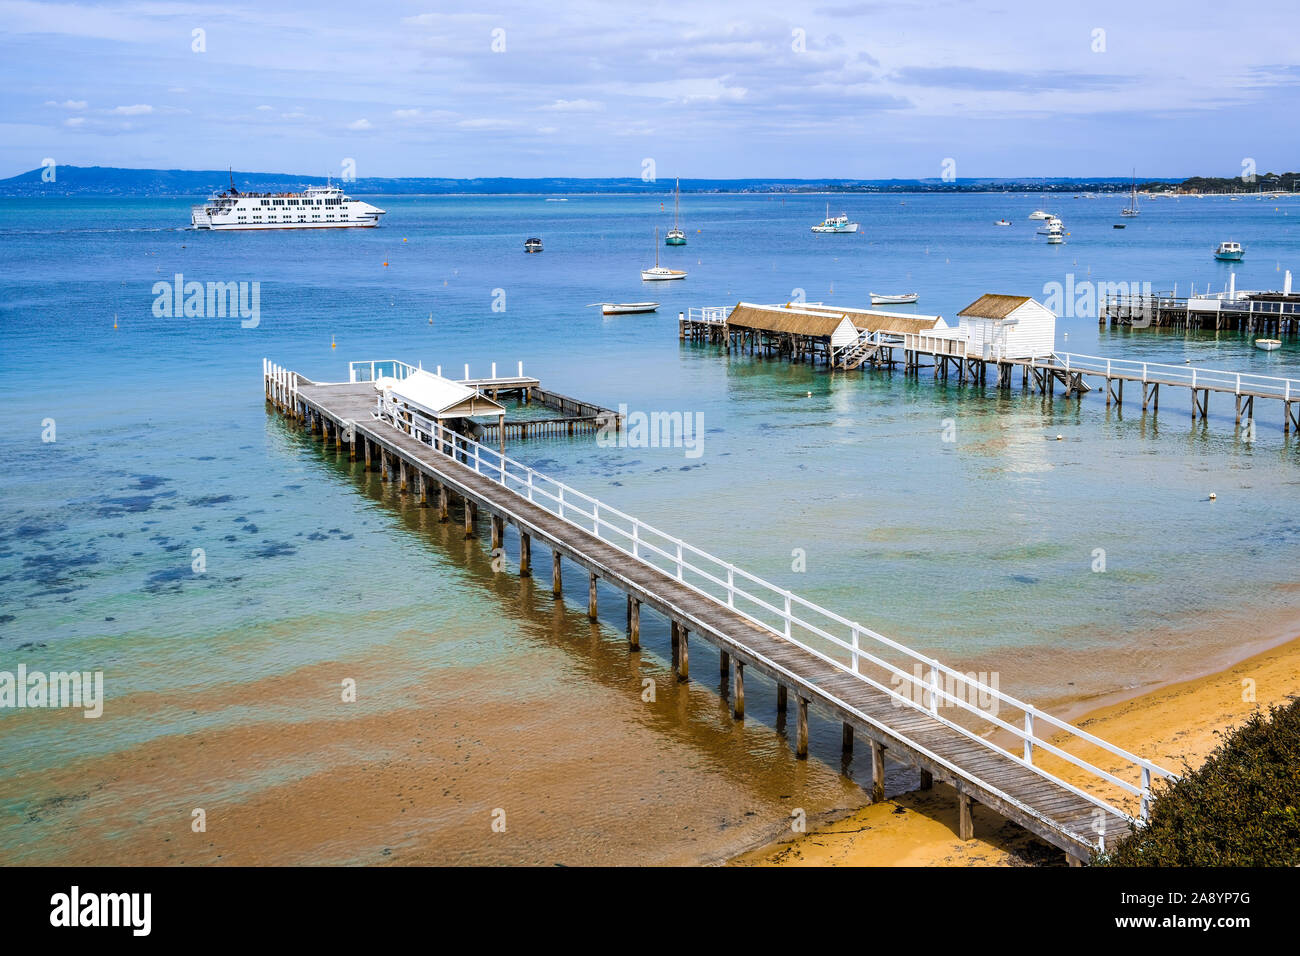 Coastal landscape - wooden piers extending into shallow bay water with passenger ferry sailing in the distance. Melbourne, Victoria, Australia Stock Photo